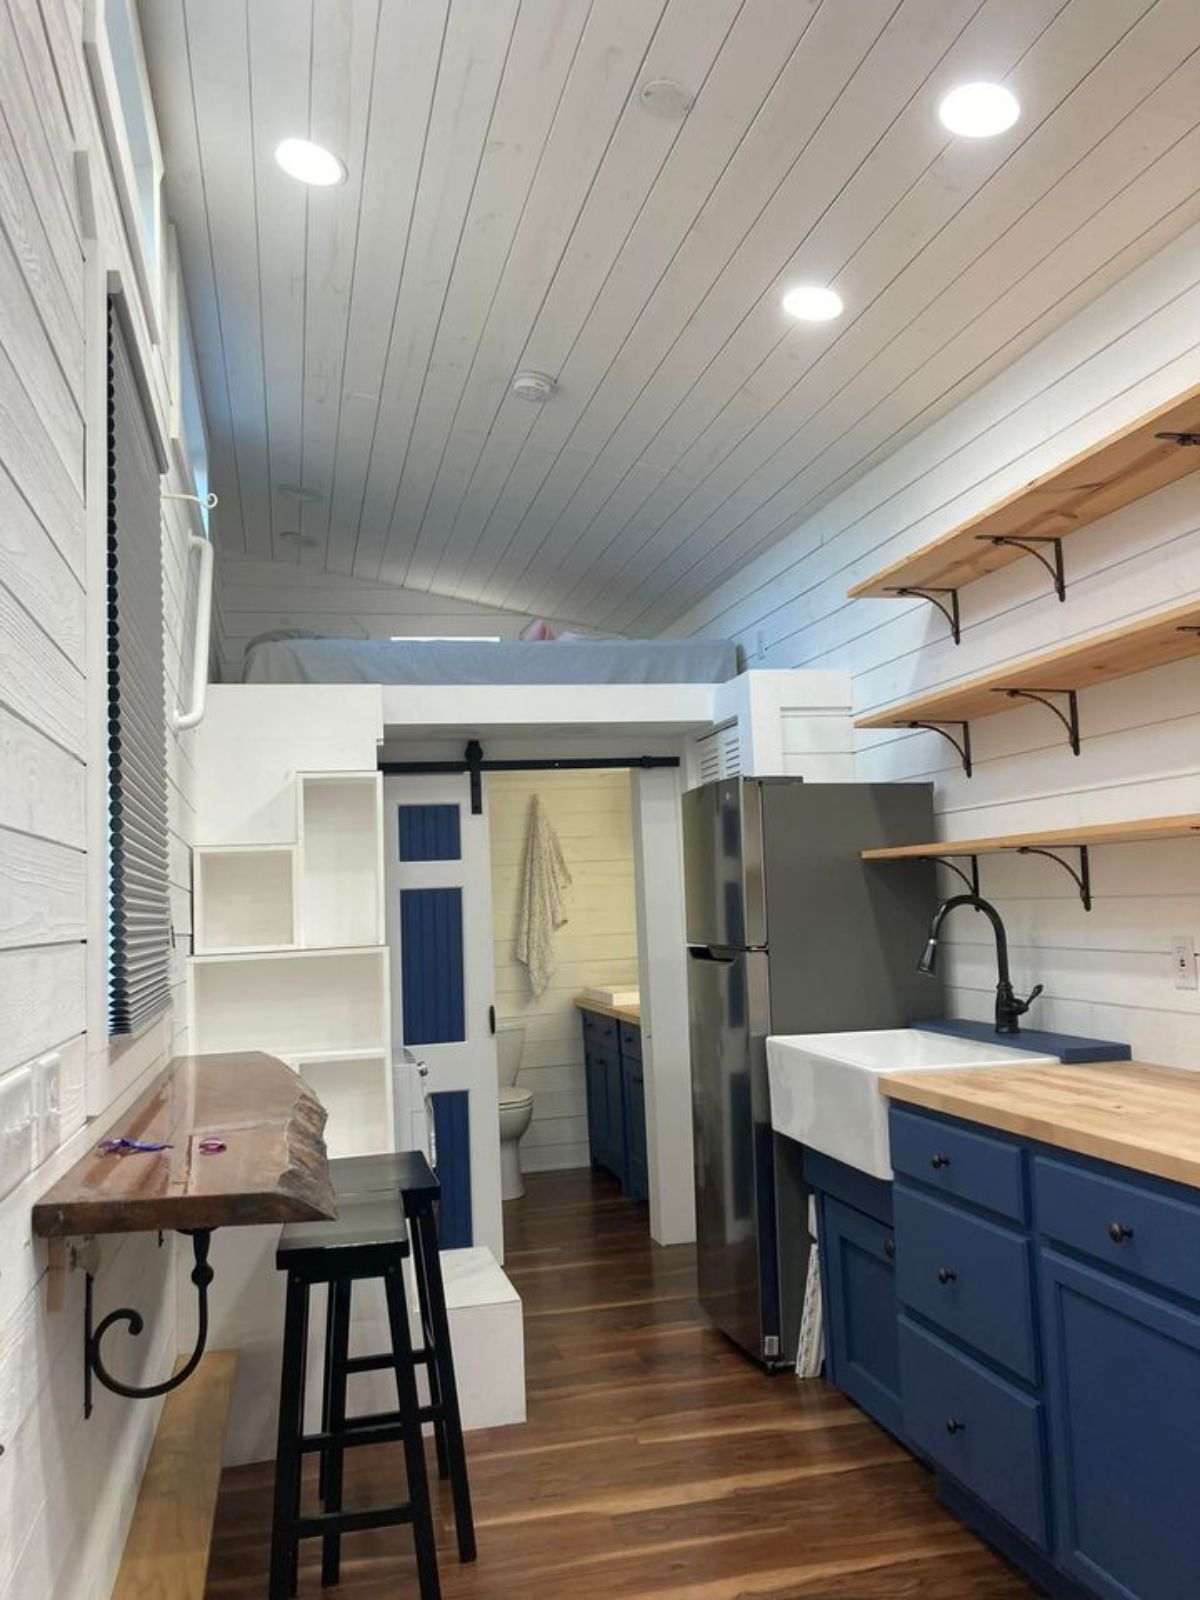 shelf below window on right and blue cabinets with butcher block counters on right of tiny home